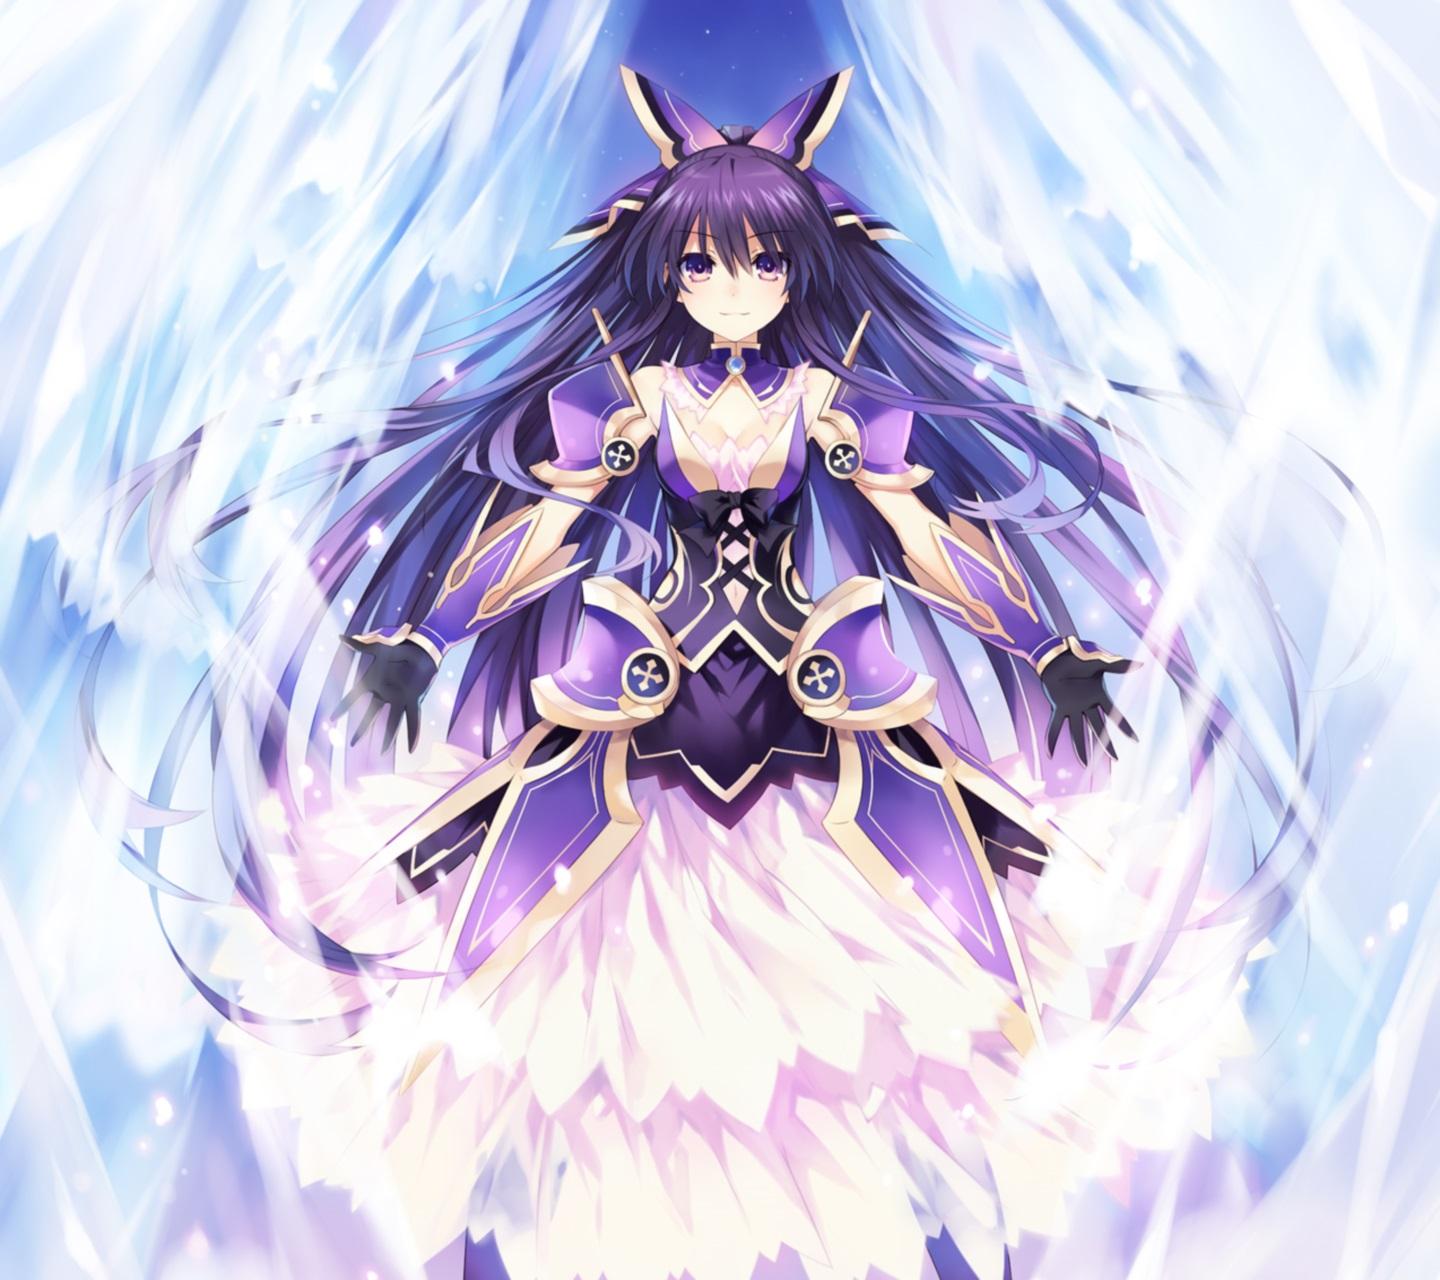 Date A Live wallpaper for smartphones iPhone Android 720x1280